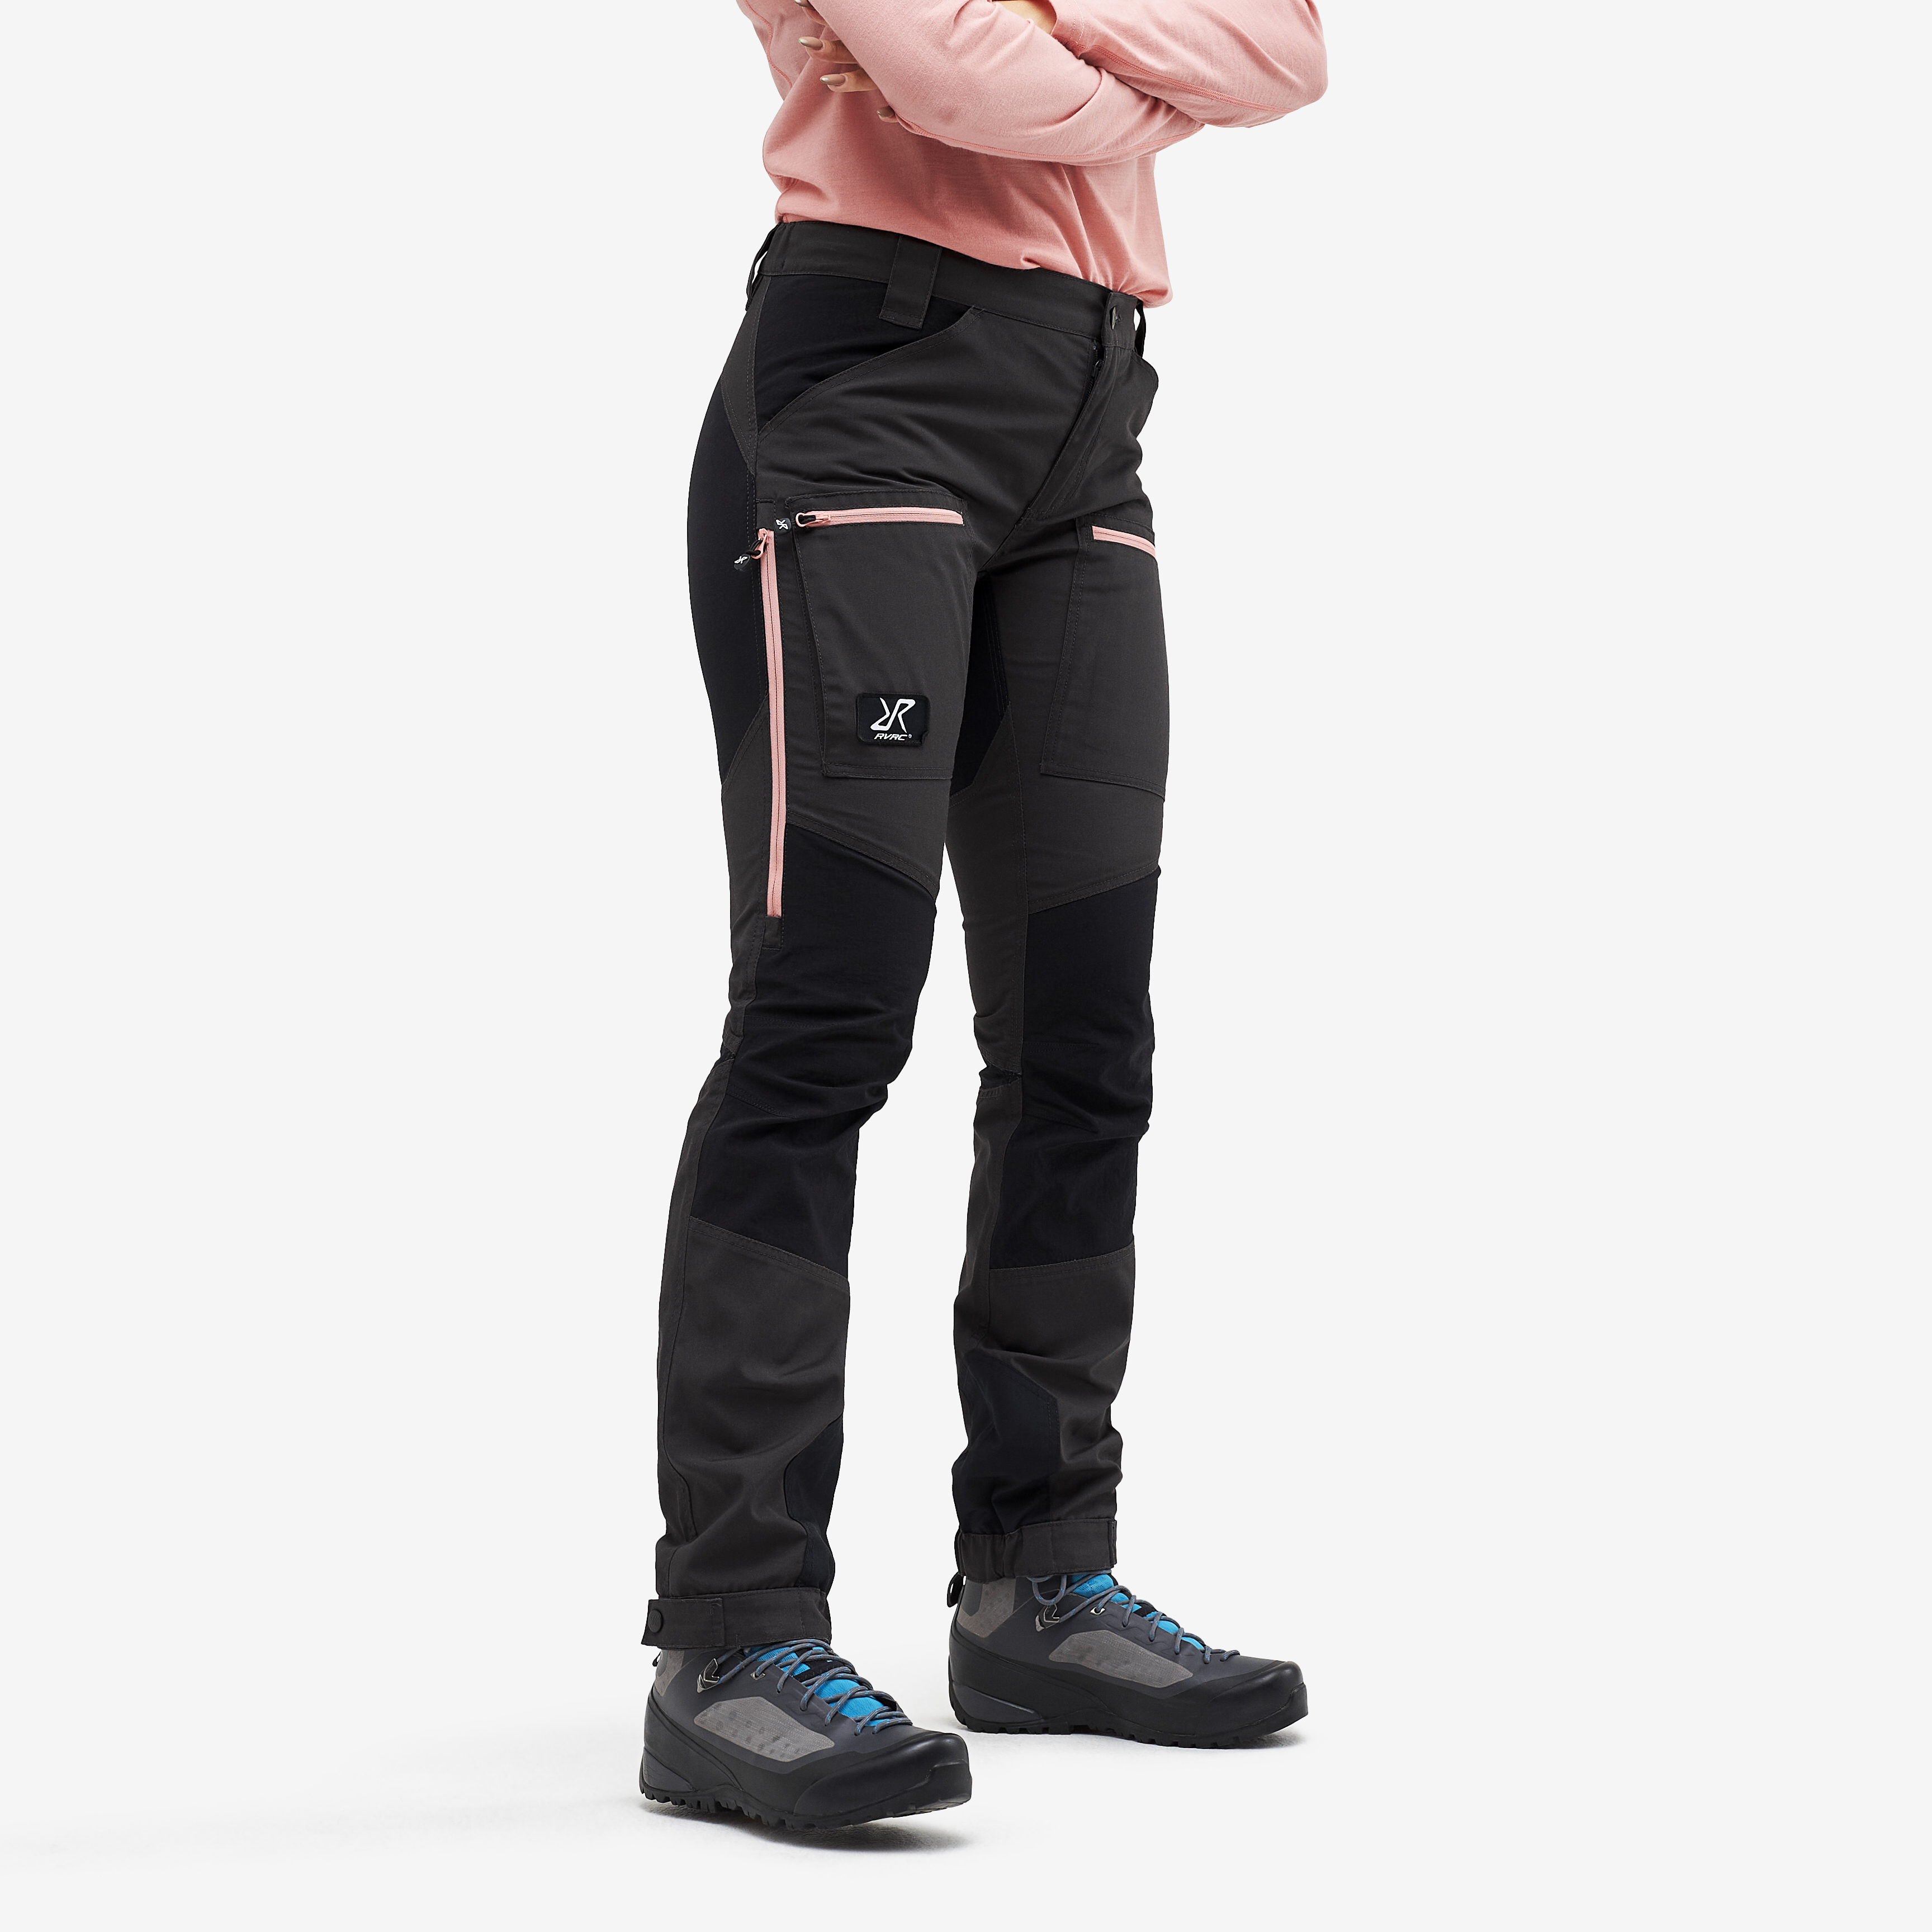 Nordwand Pro Pants Anthracite/Dusty pink Dame